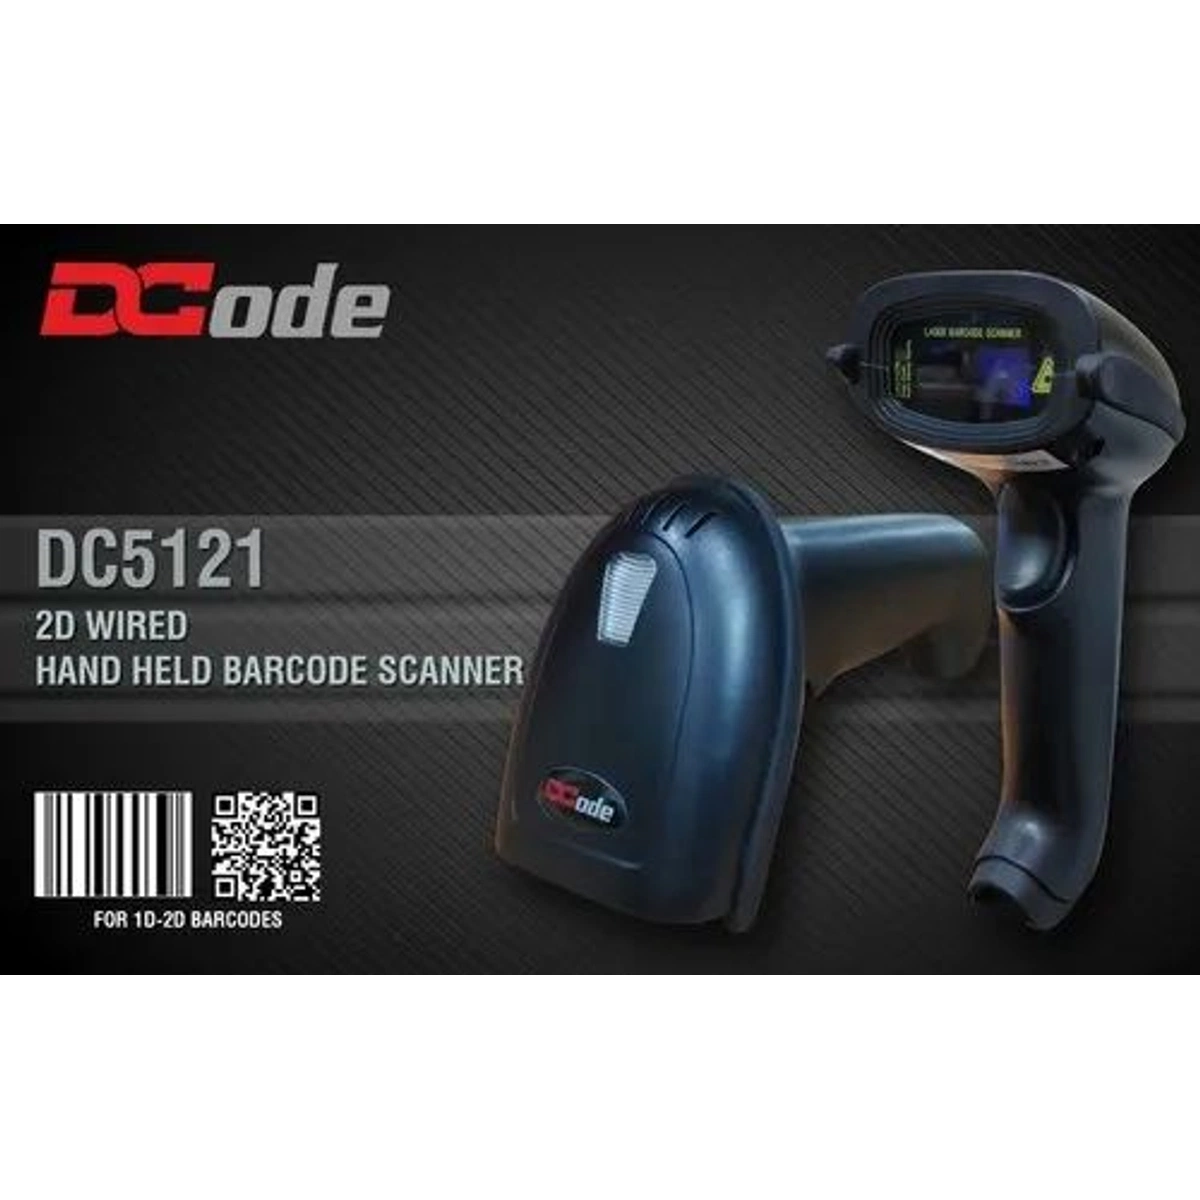 DC-5121 Wired Barcode Scanner